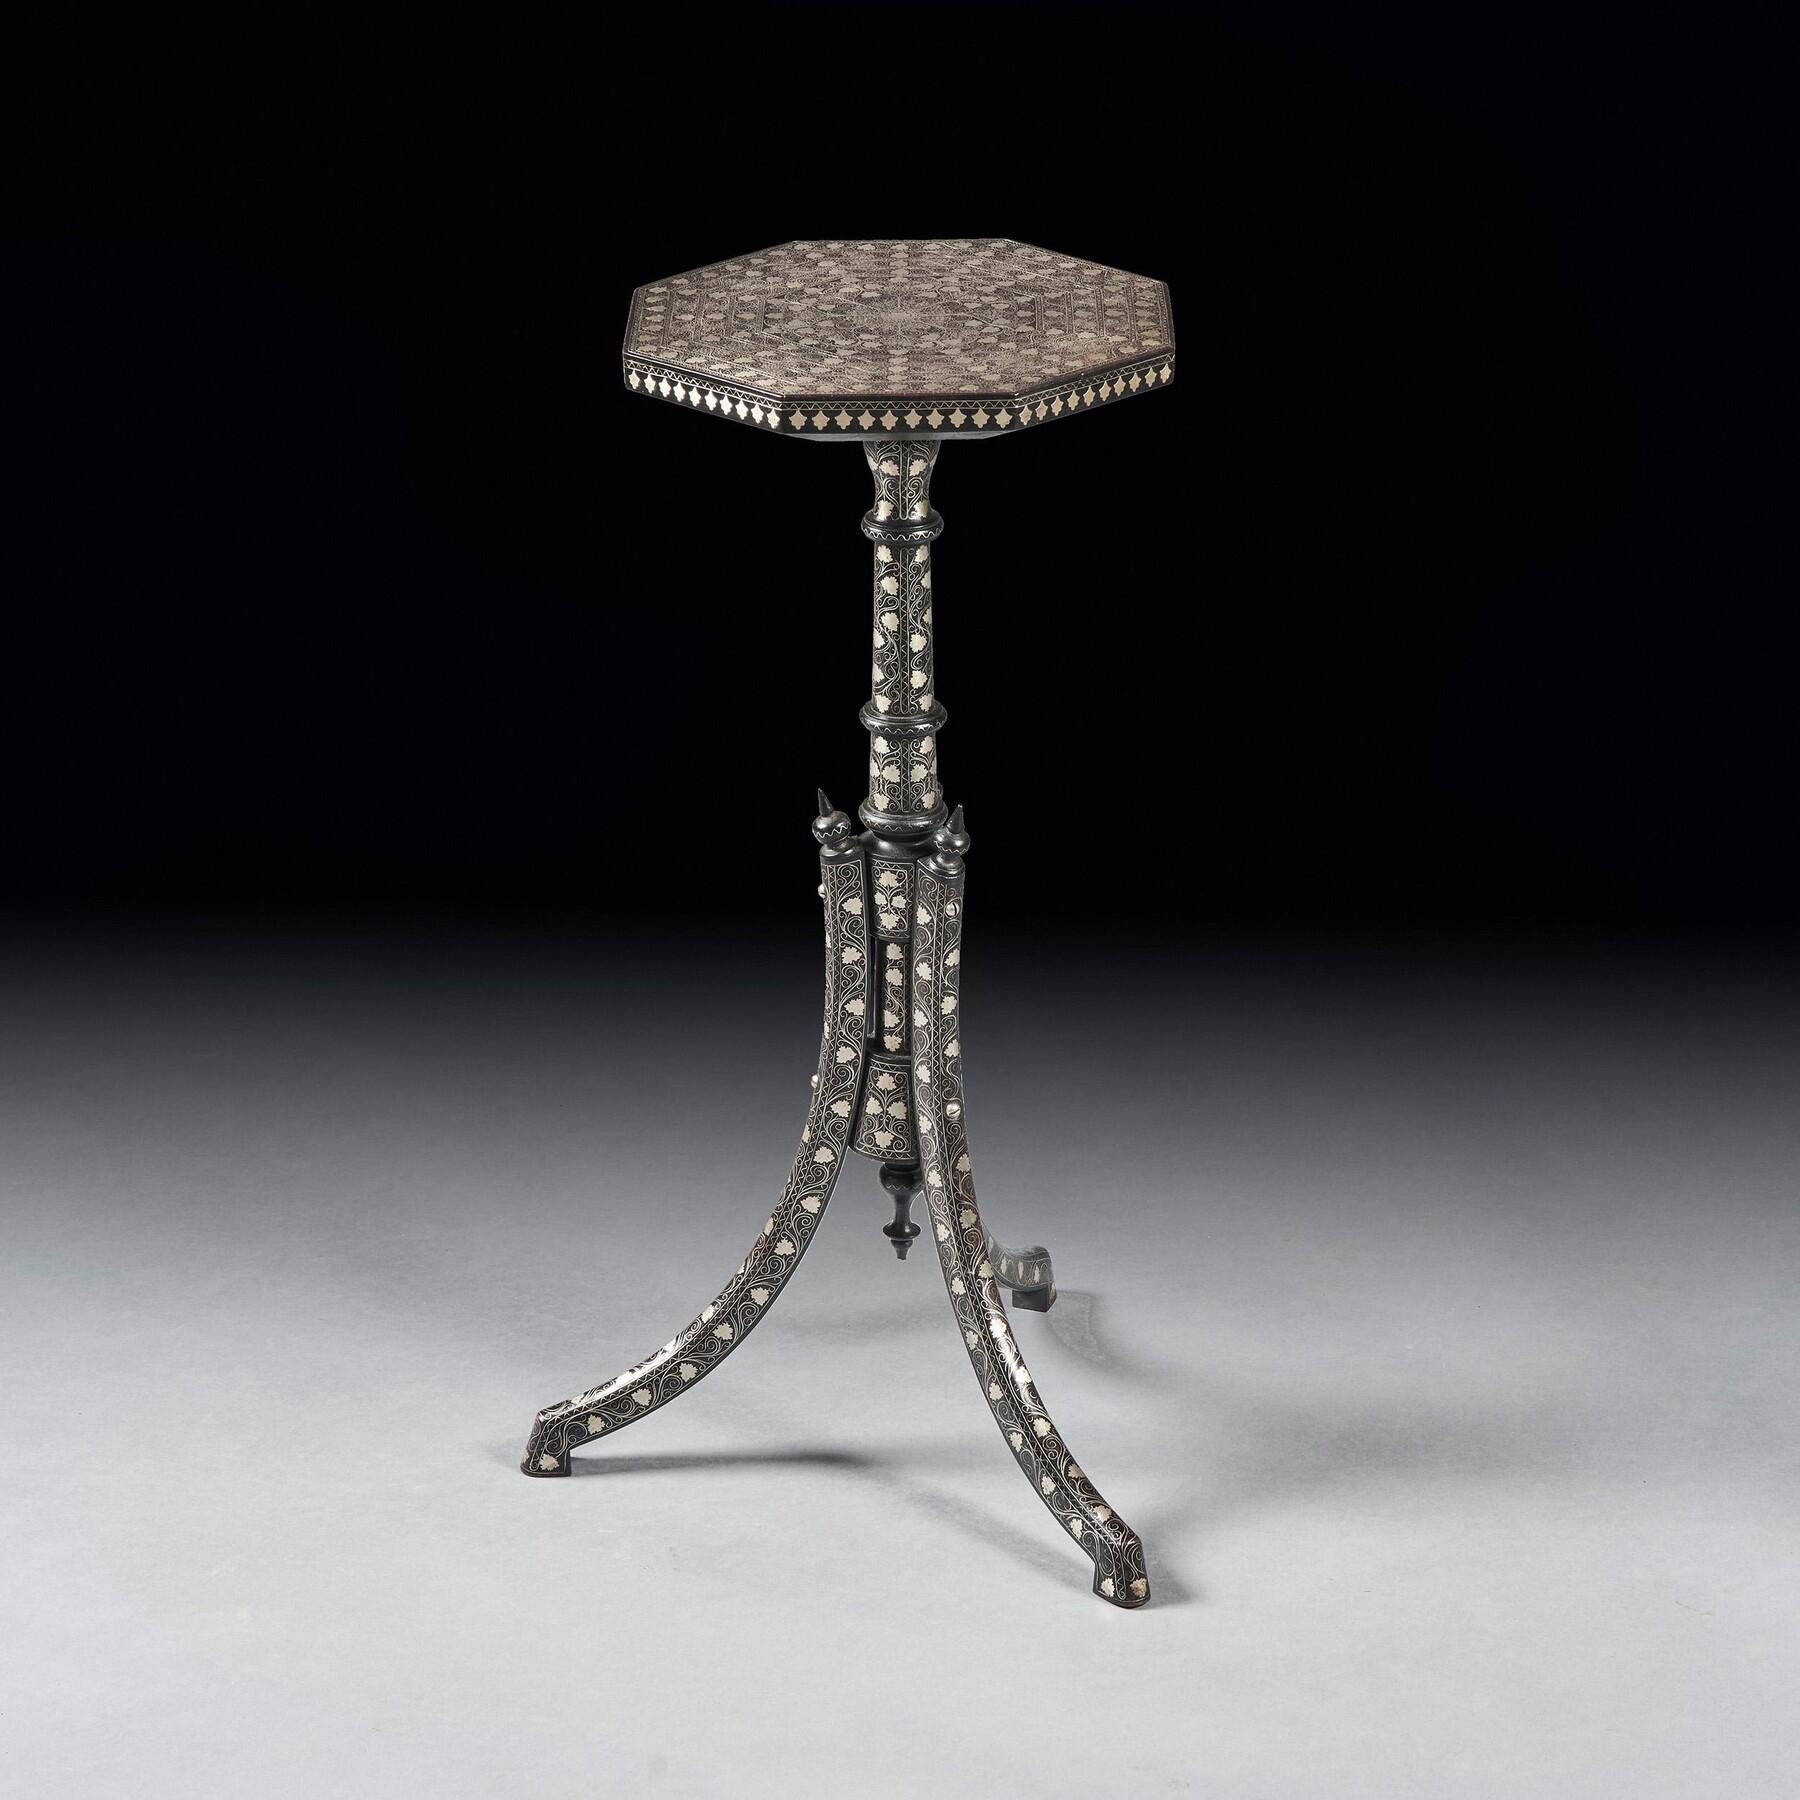 An Extremely Fine Ottoman Silver Inlaid Coffee Table Vortik Potikian 1